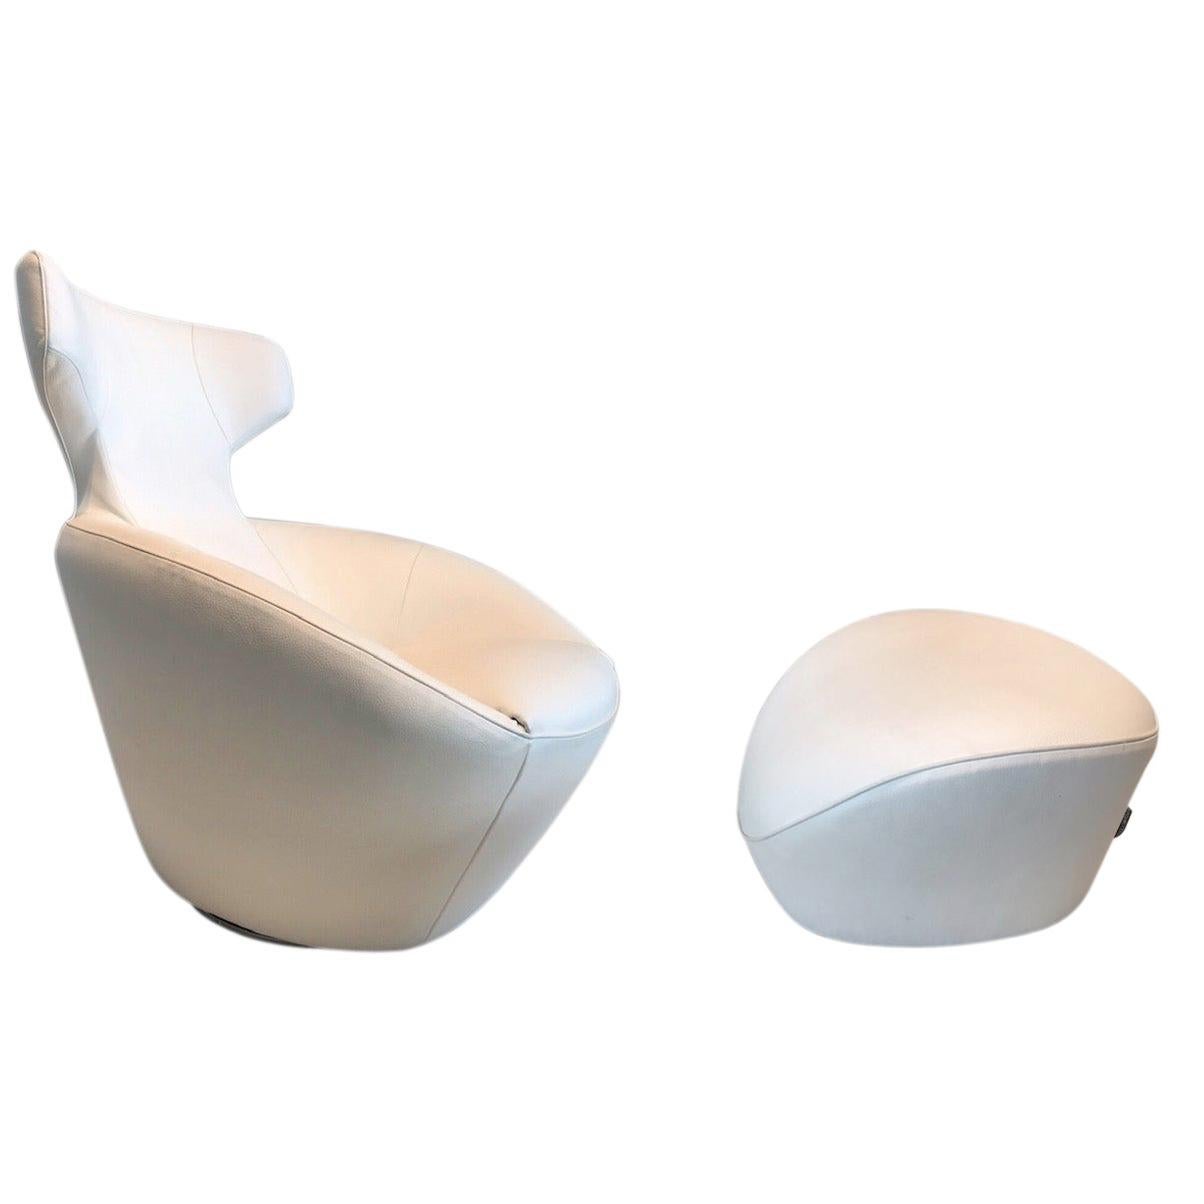 Edito Swivel Lounge Chair and Ottoman by Roche Bobois